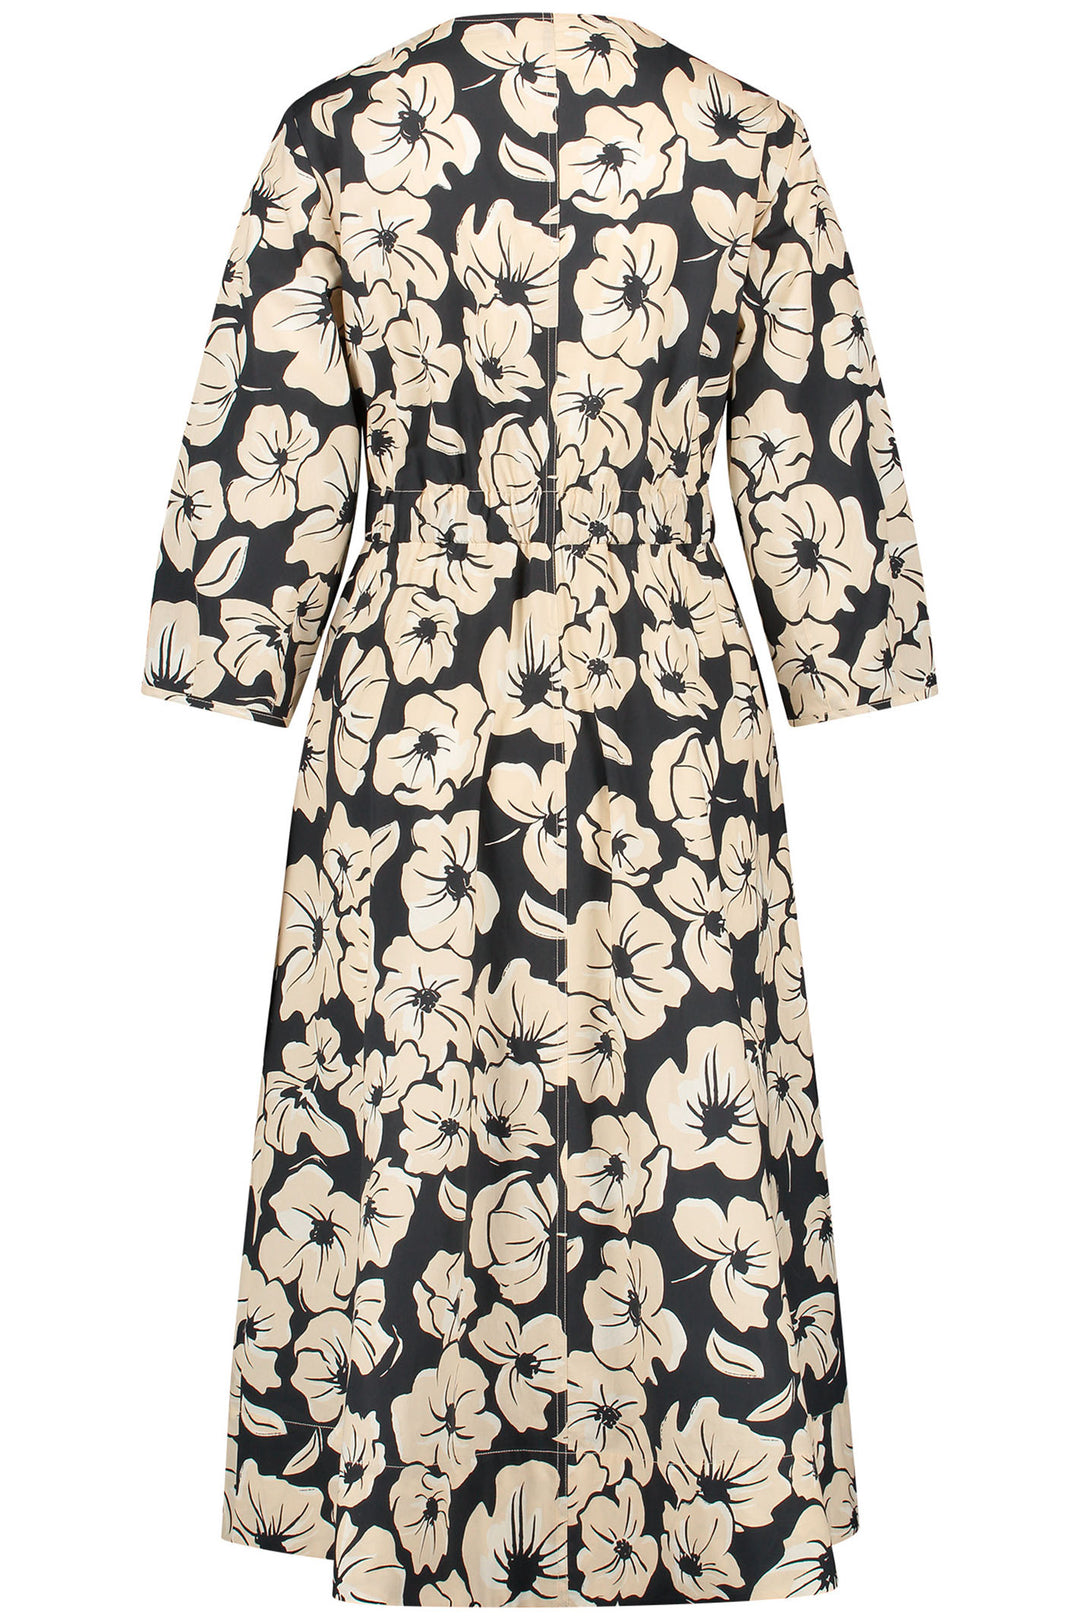 Gerry Weber 380024 Black & Taupe Hibiscus Print Dress - Experience Boutique